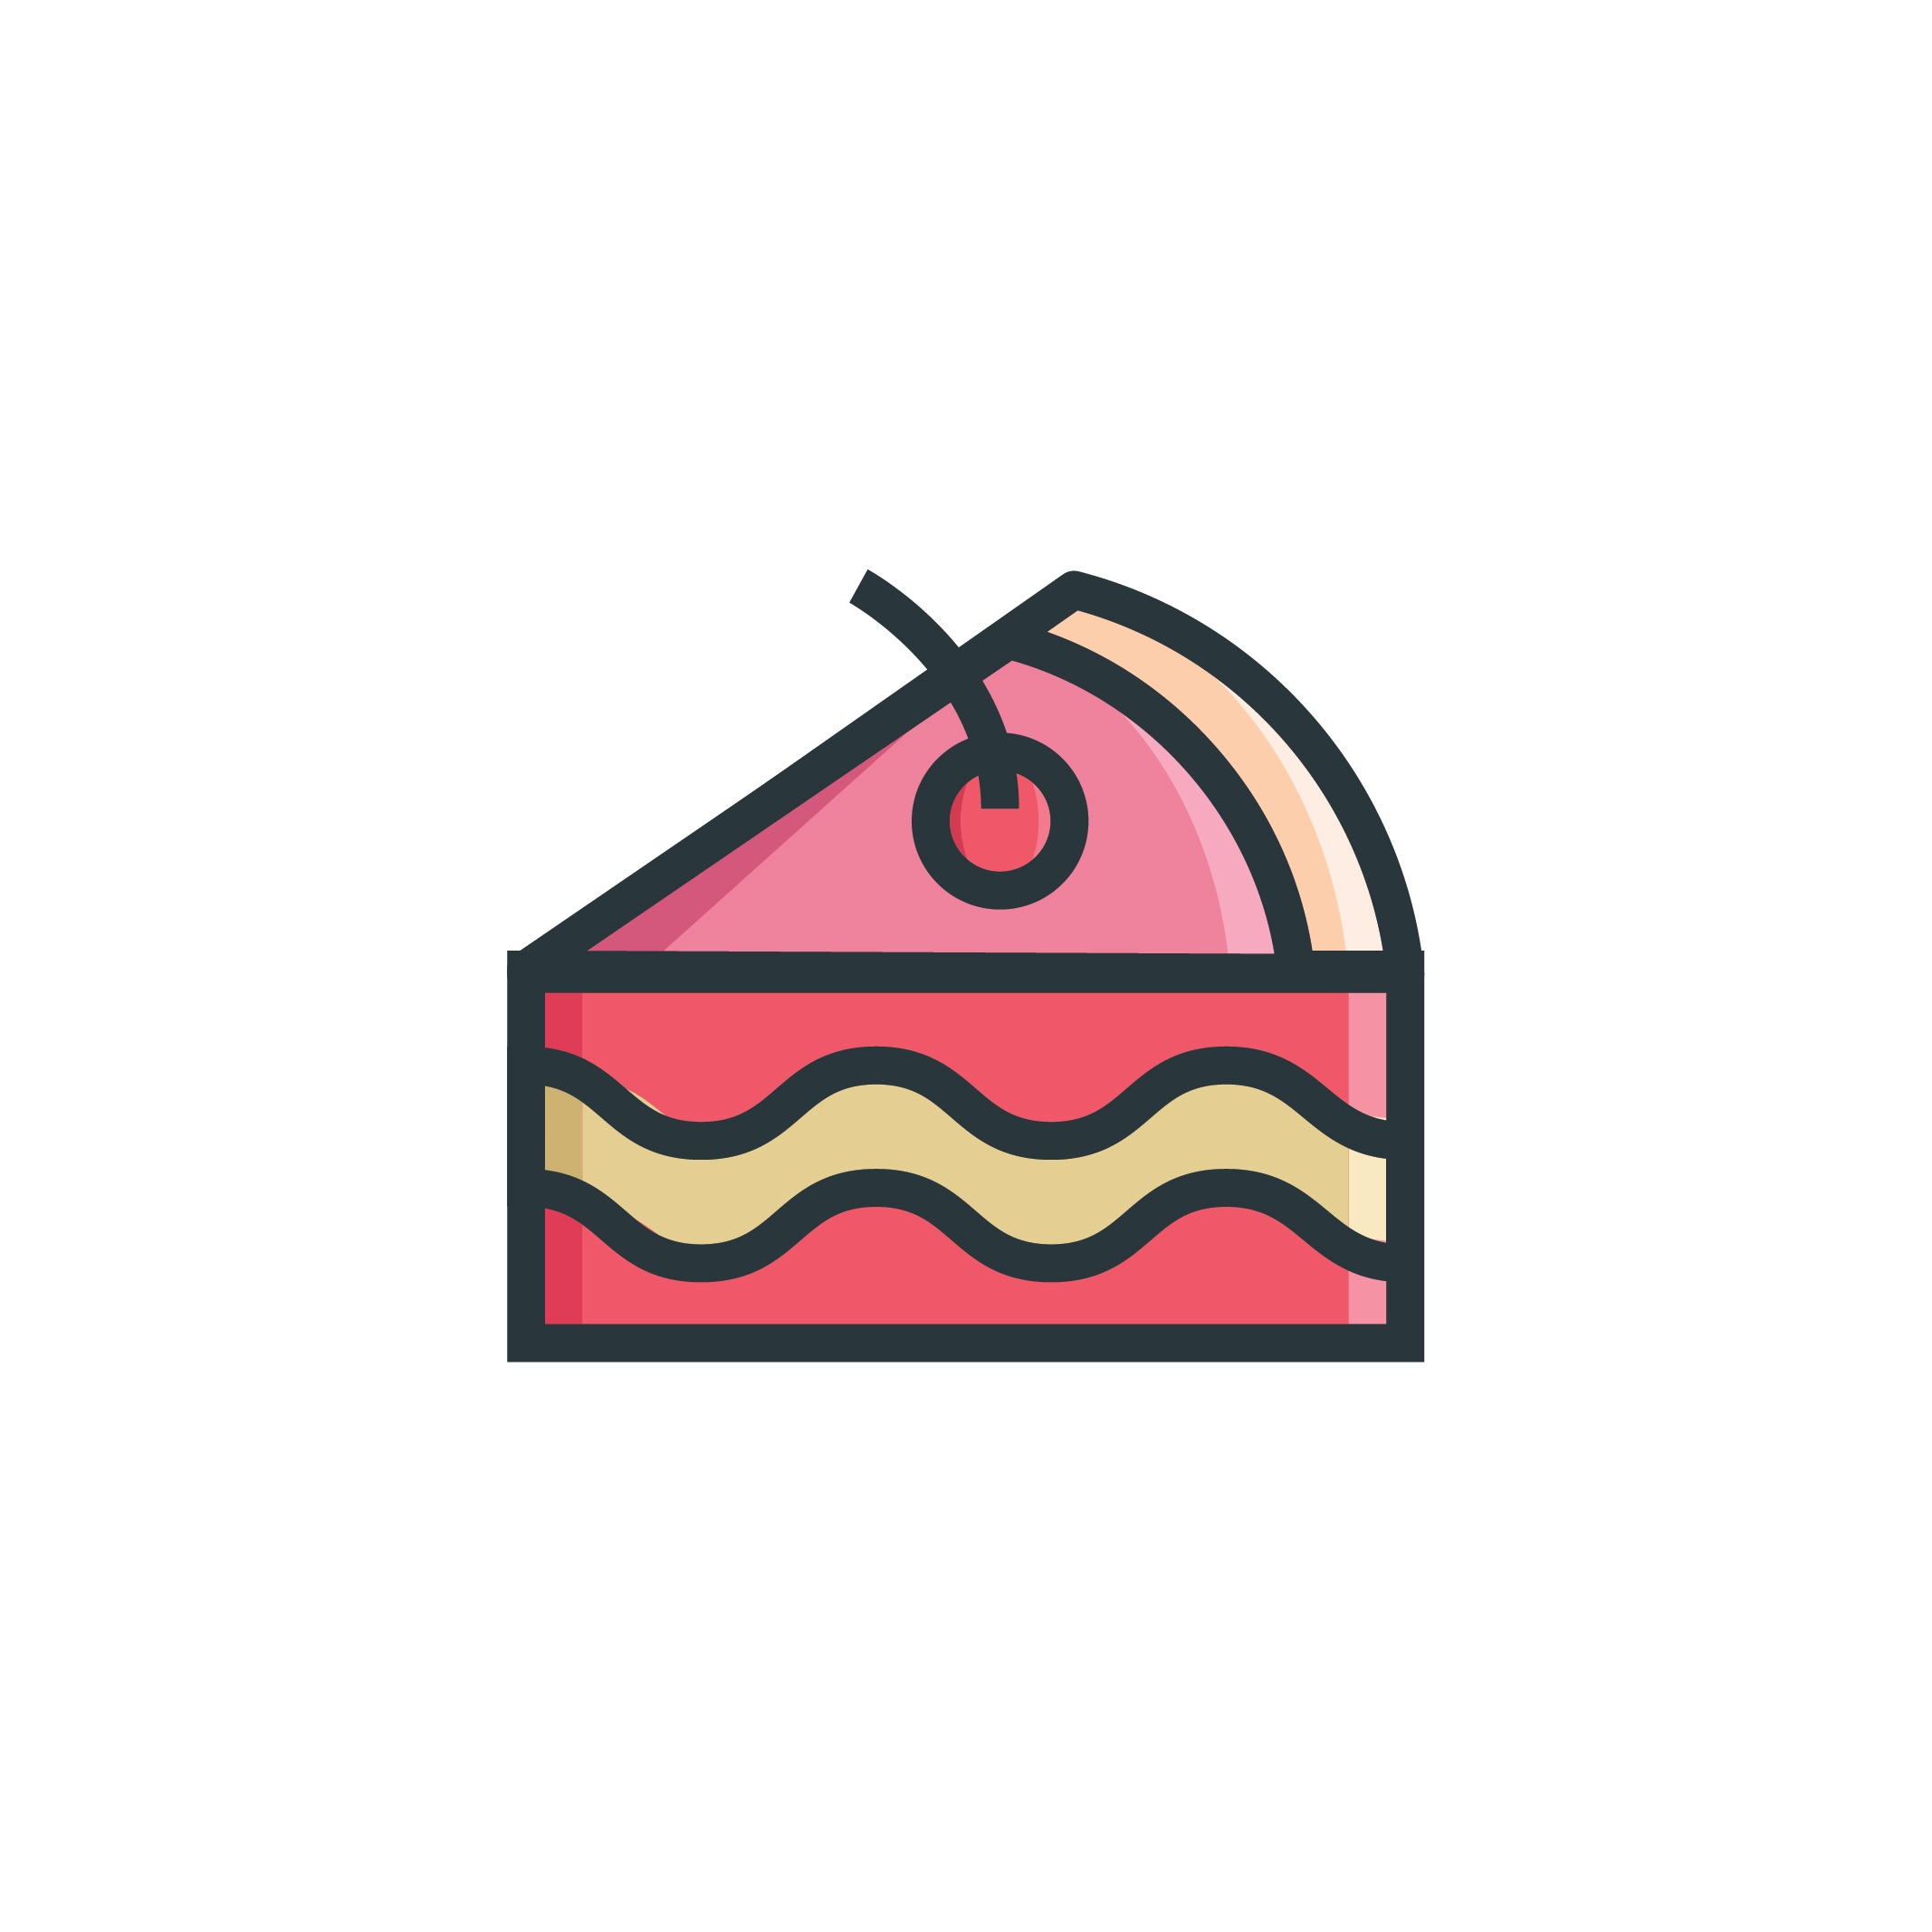 Piece Of Cake - Hand Drawn Sketch On White Background Royalty Free SVG,  Cliparts, Vectors, And Stock Illustration. Image 195399436.